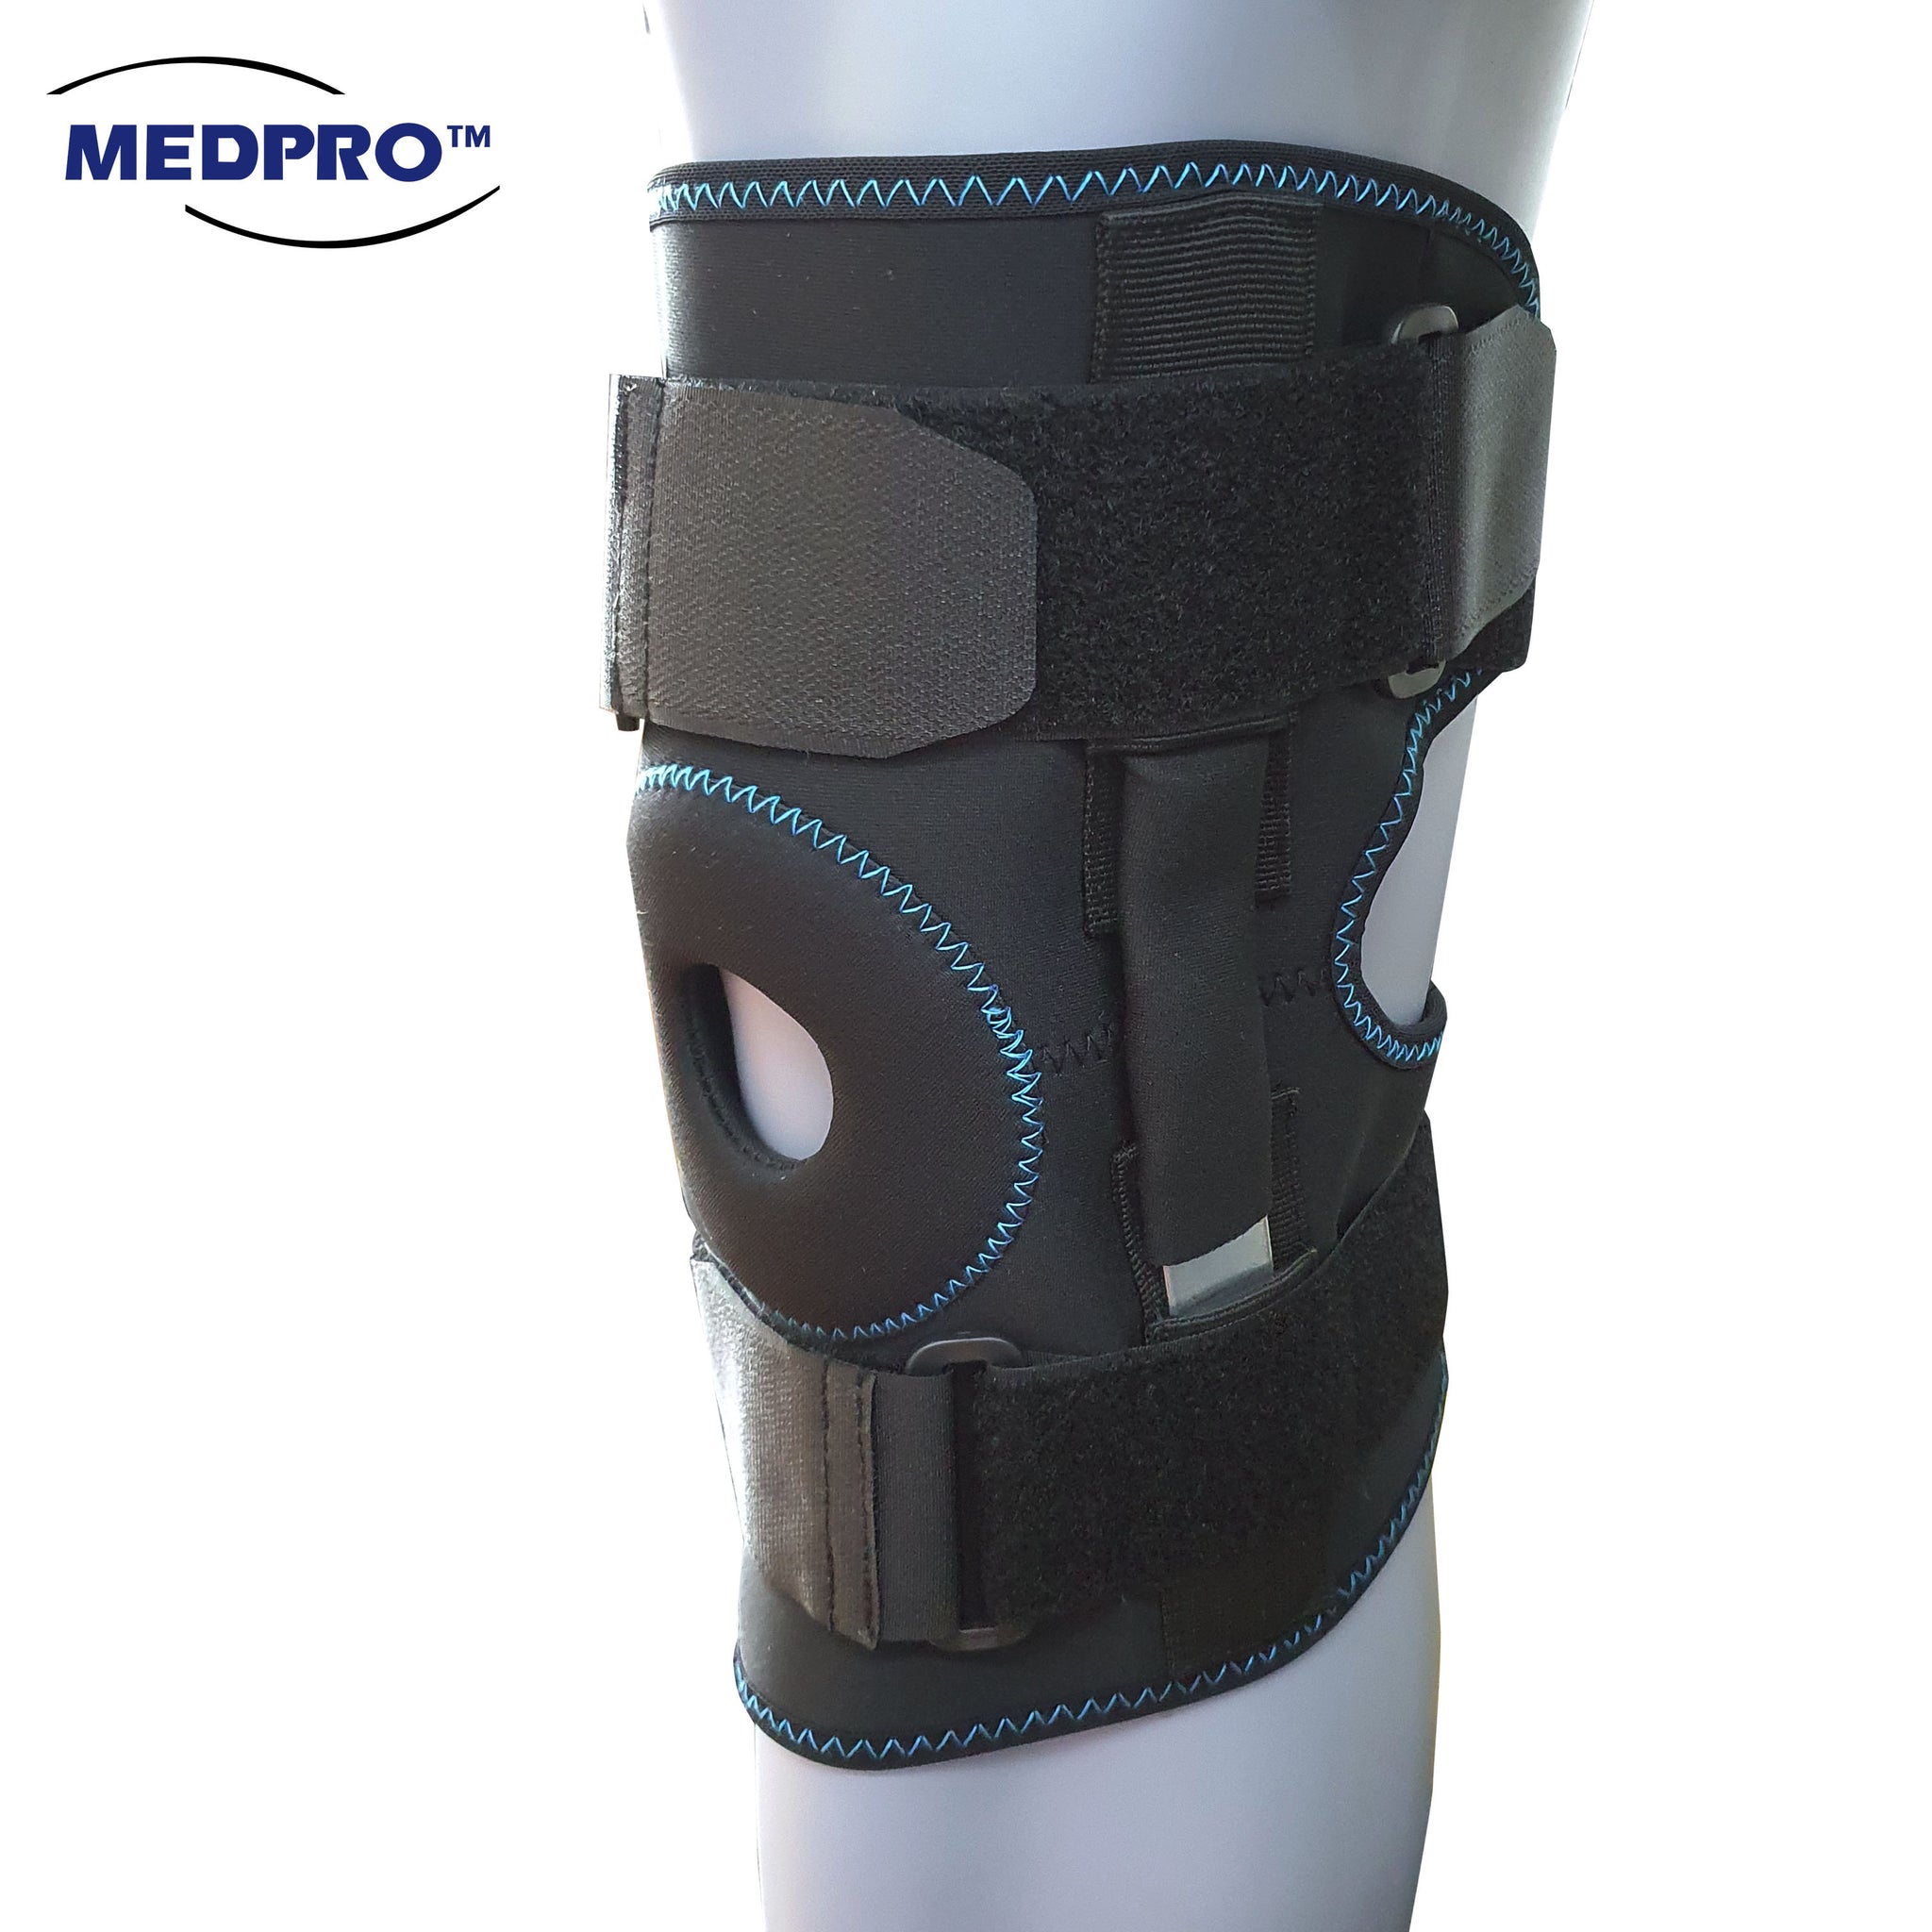 Buy Now - Medium Knee Brace for Body Care: Adjustable Straps, Breathable  Fabric, Open-Patella Design & More